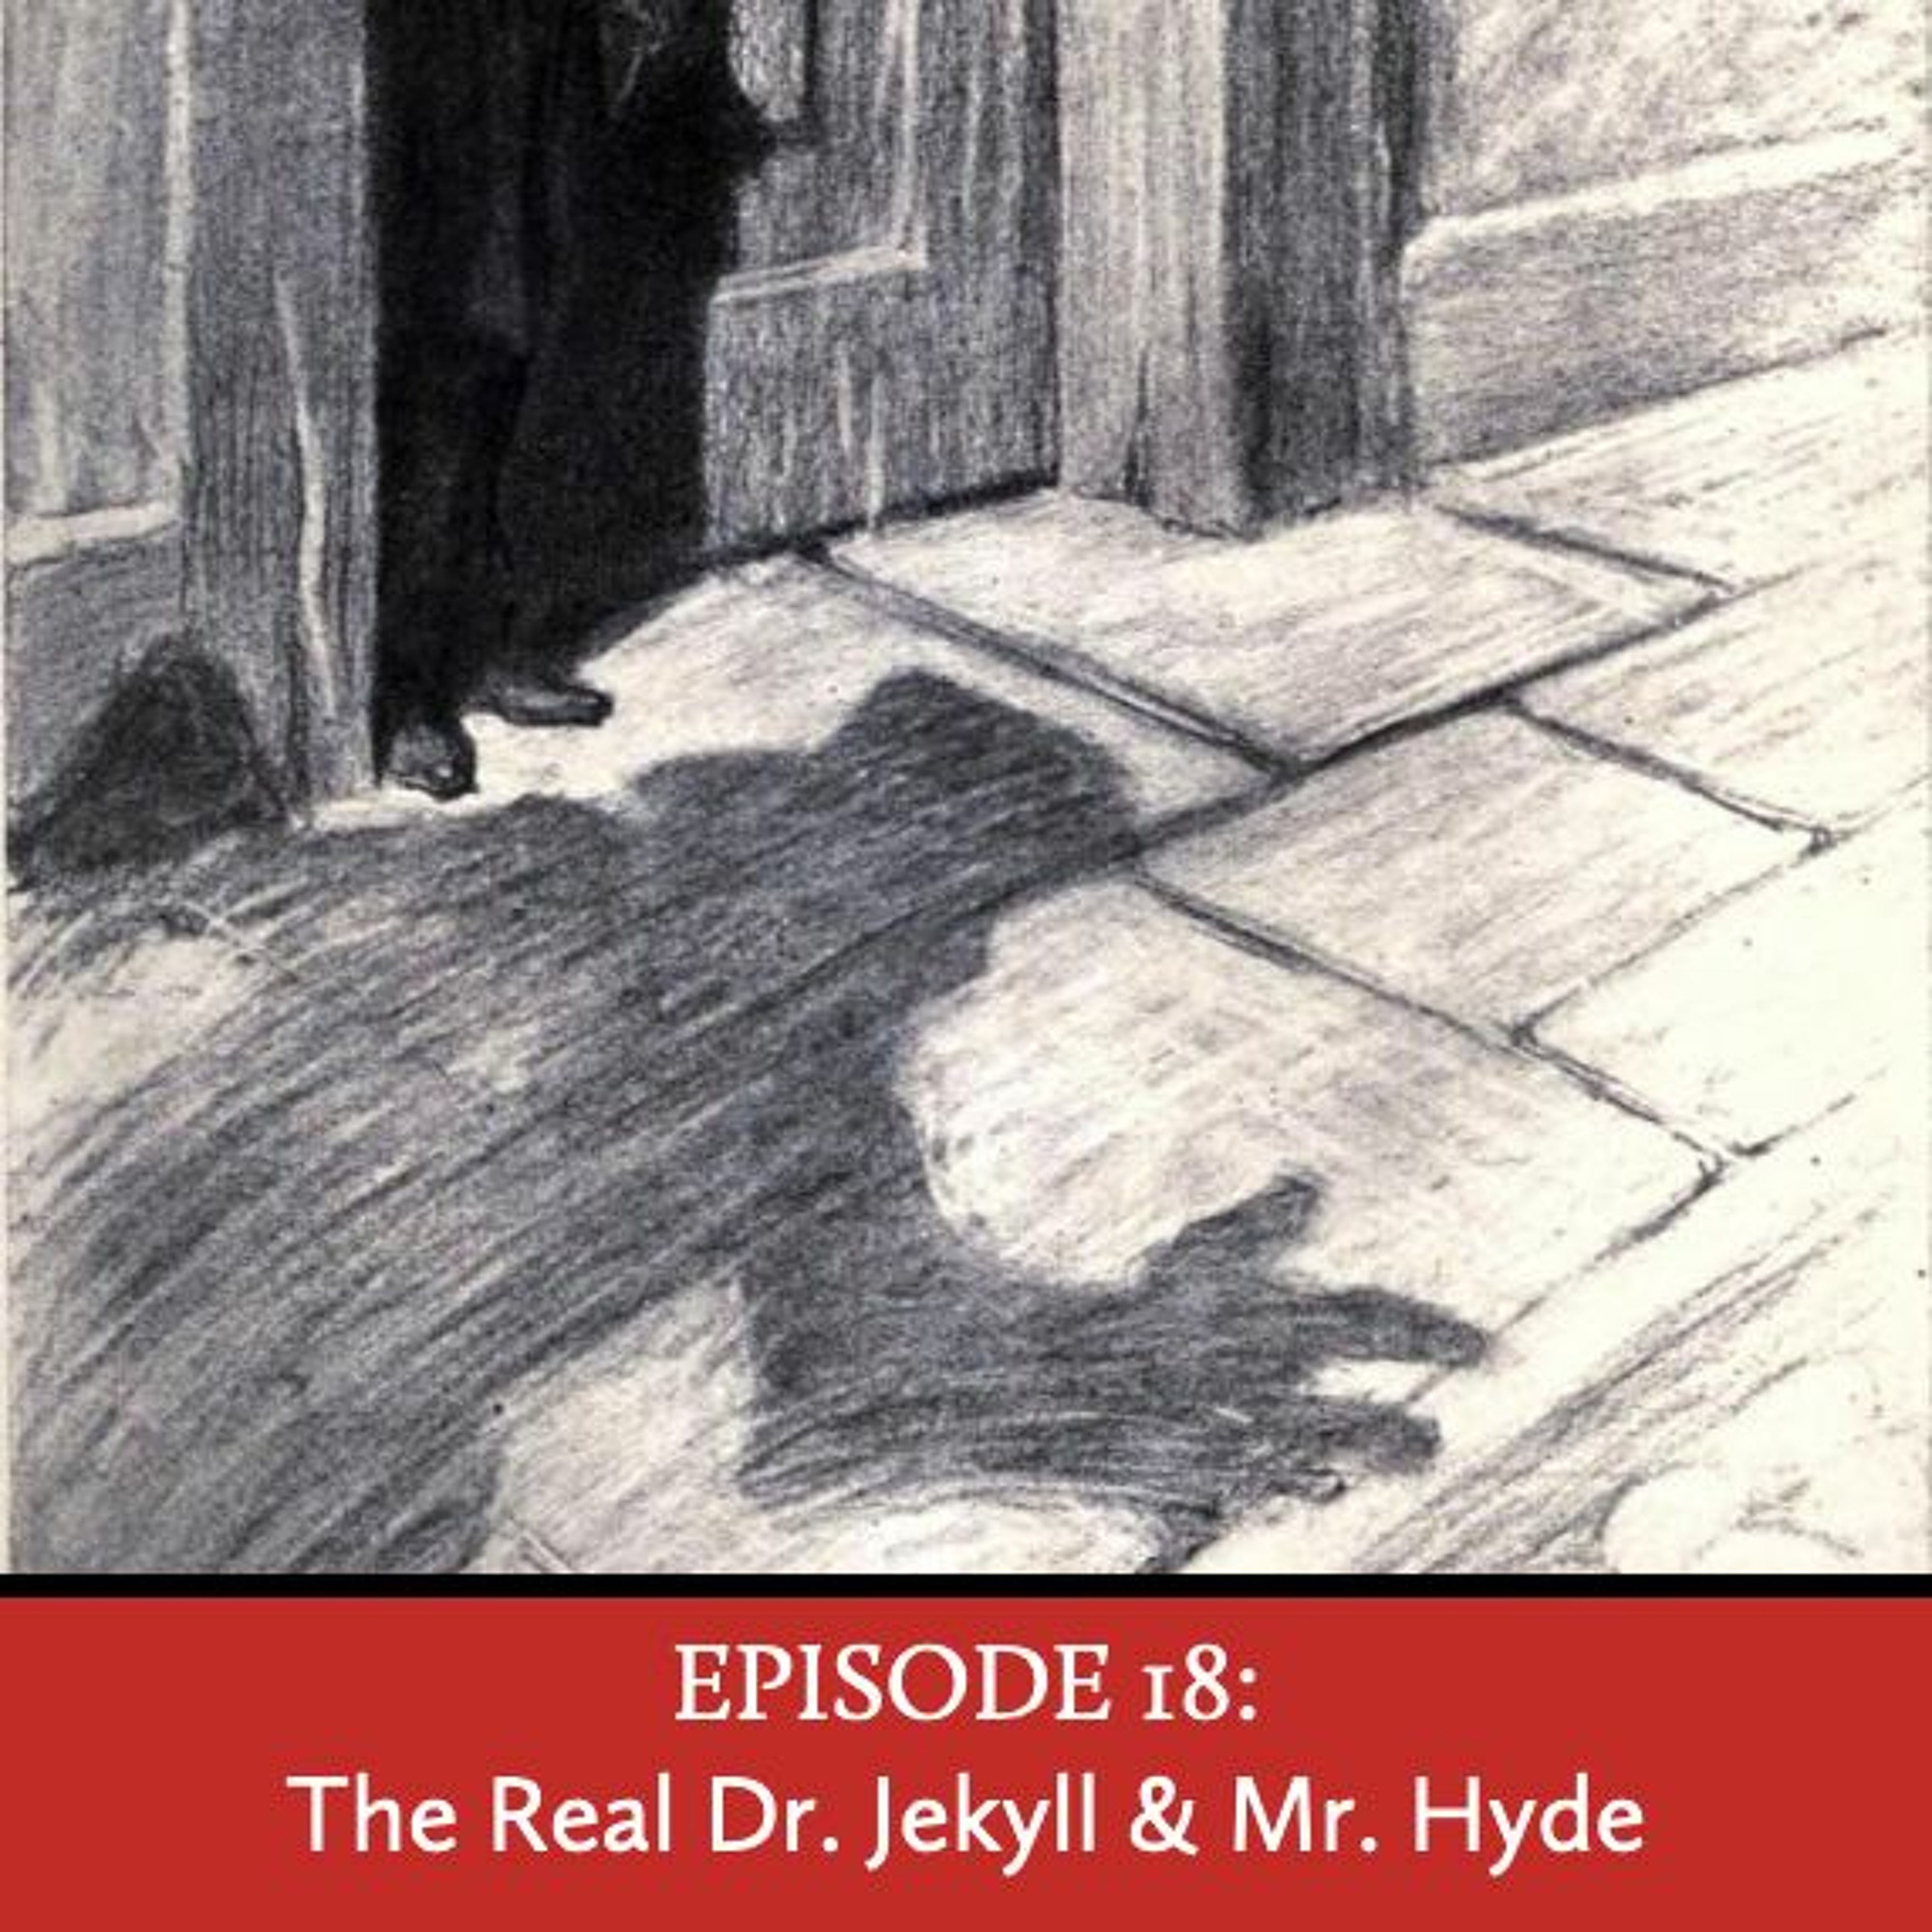 Episode 18: The Real Dr. Jekyll & Mr. Hyde